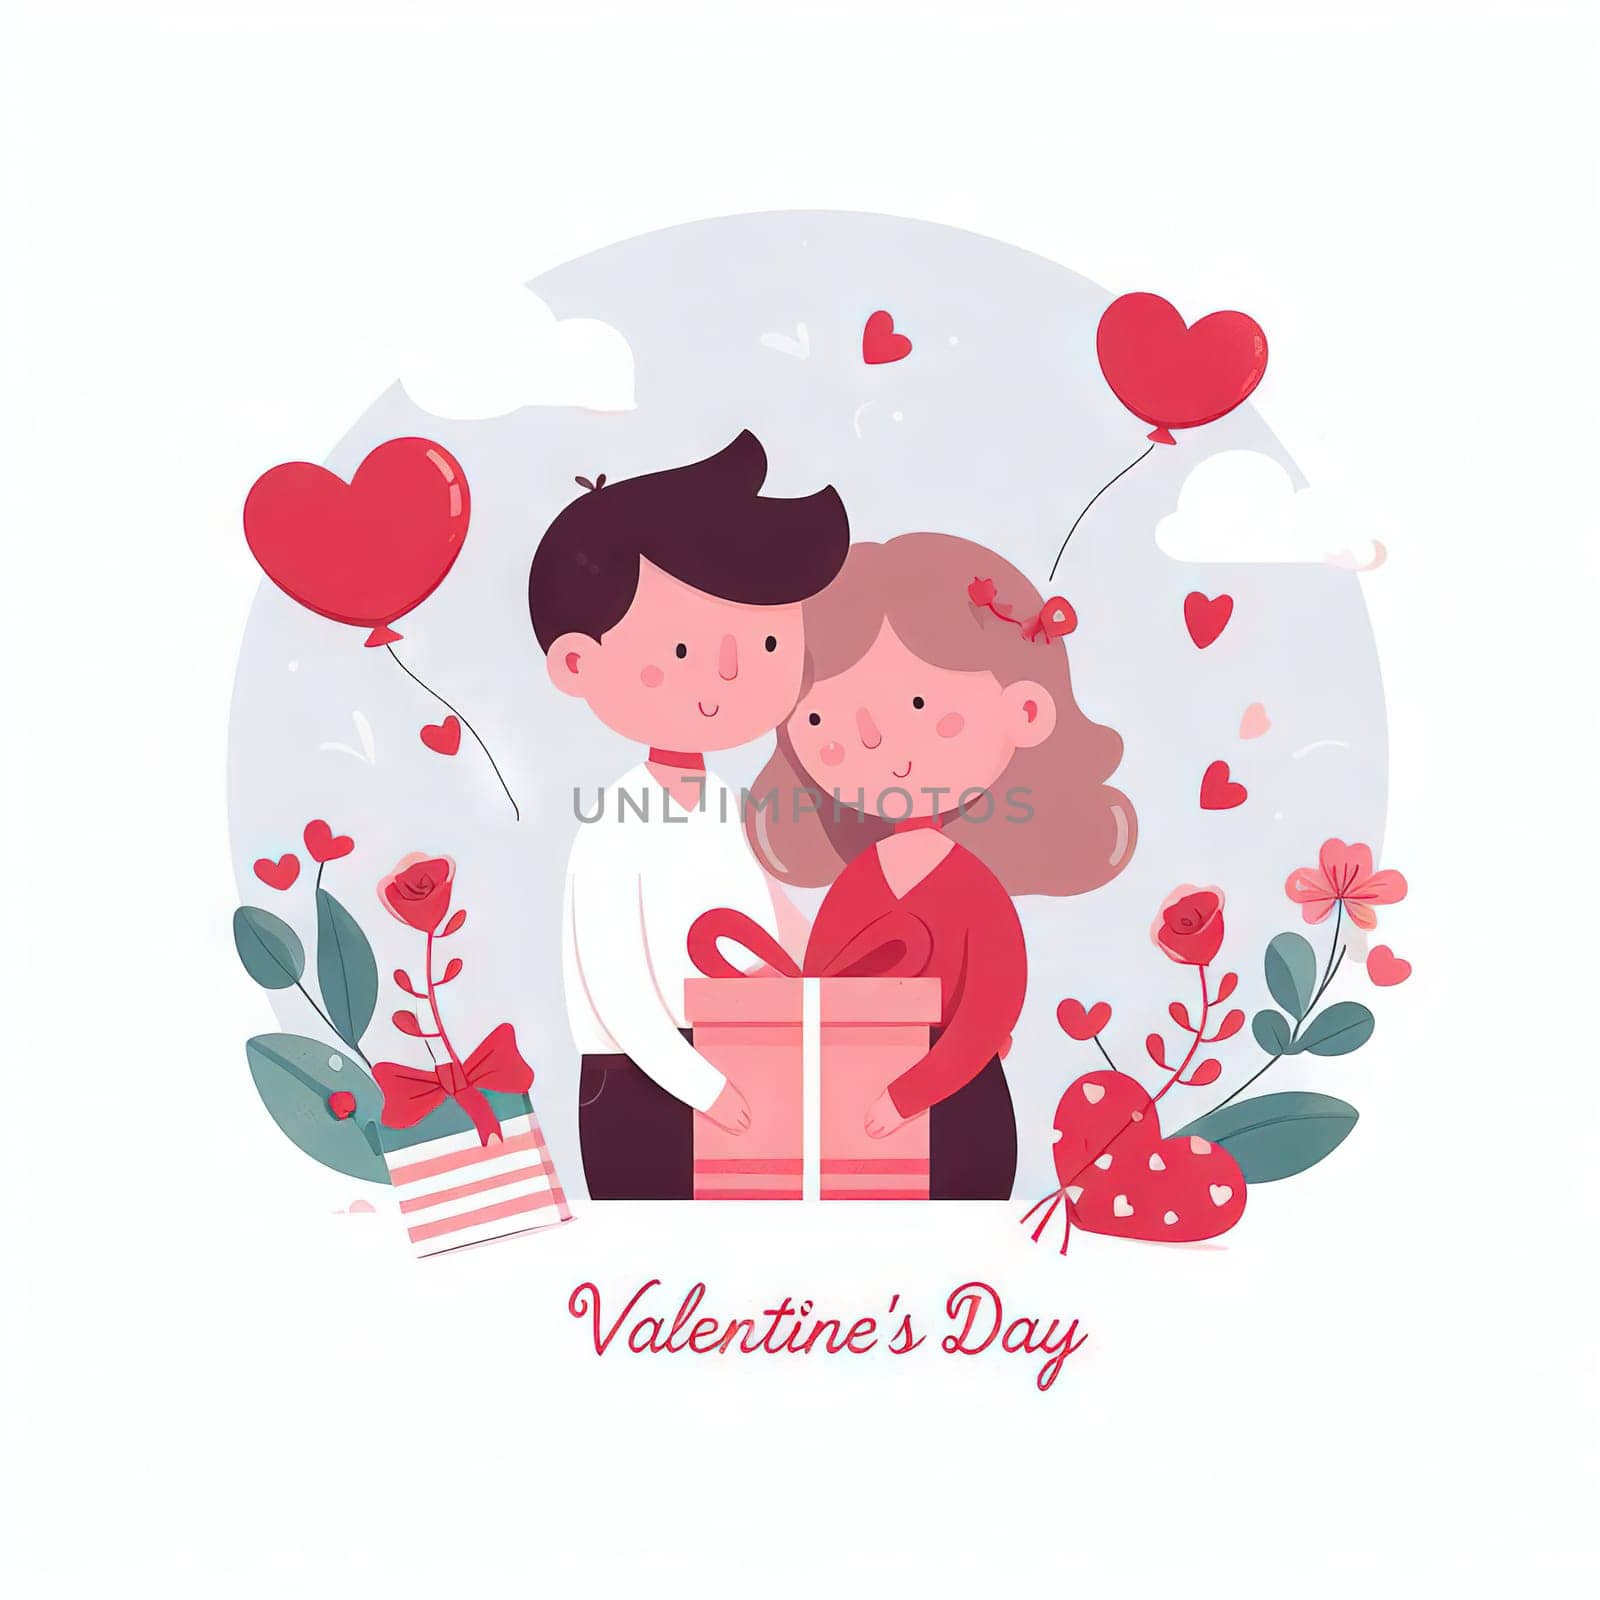 Valentine's Day poster background, suitable for poster, flyer, greeting. by EkaterinaPereslavtseva